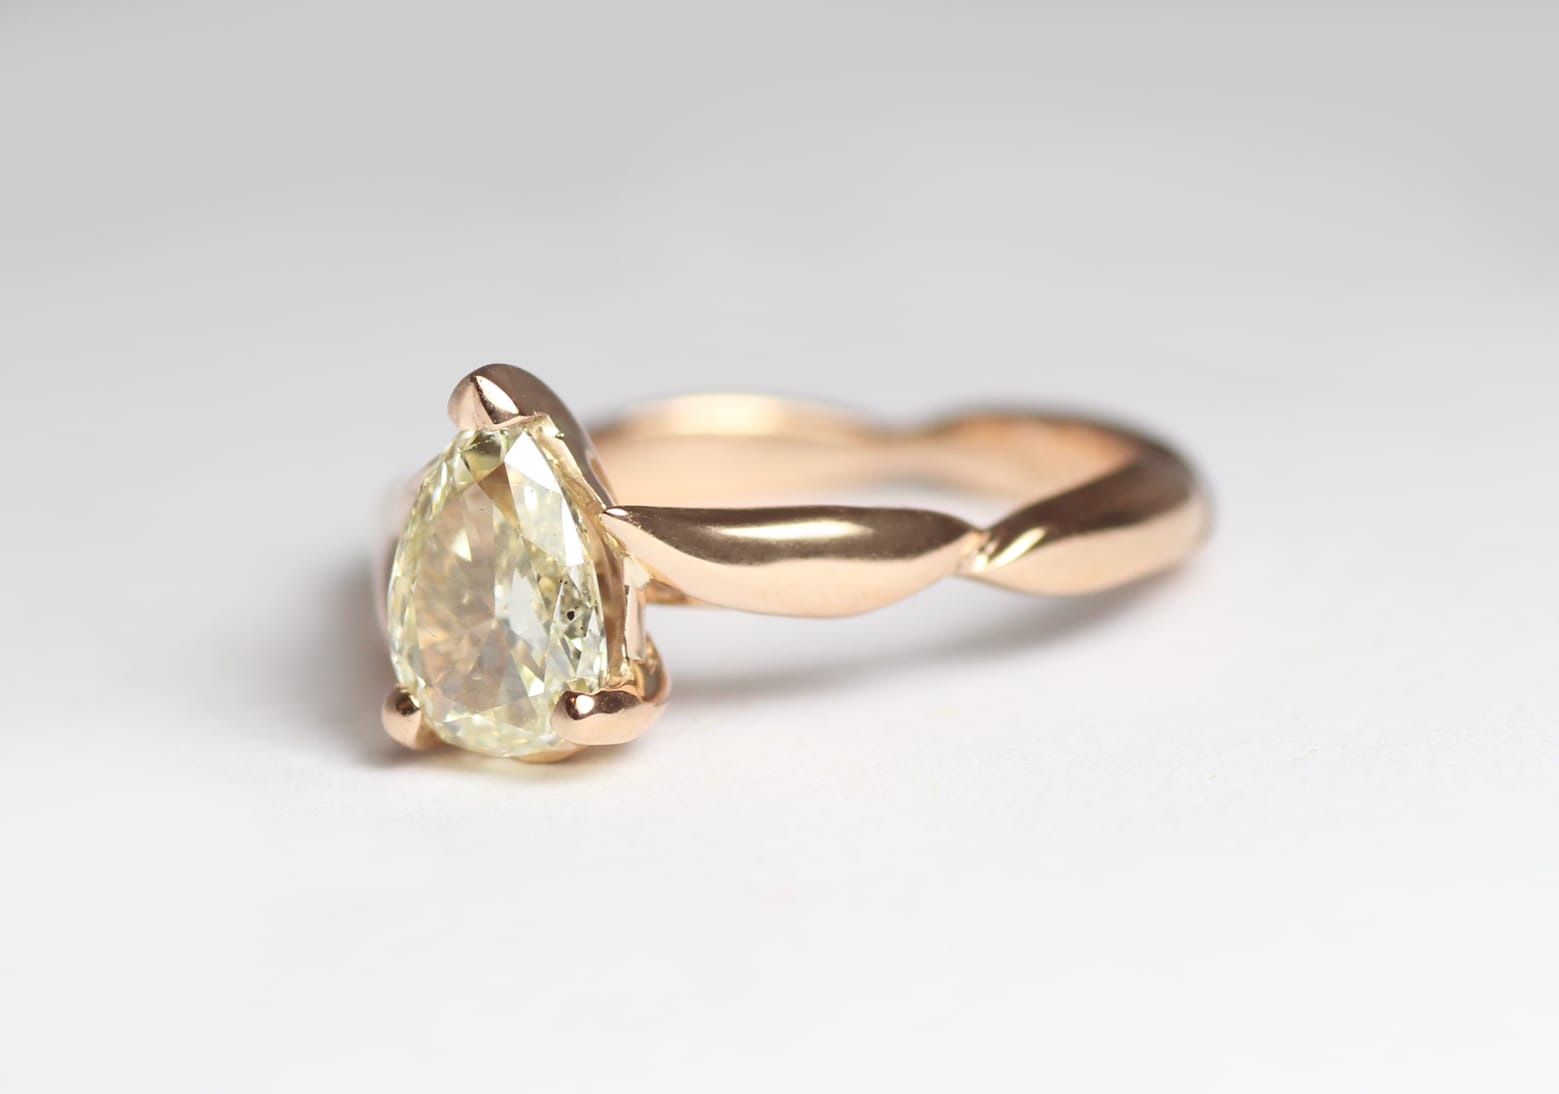 18ct Fairtrade rose gold with yellow pear diamond in bespoke design by Zoe Pook Jewellery